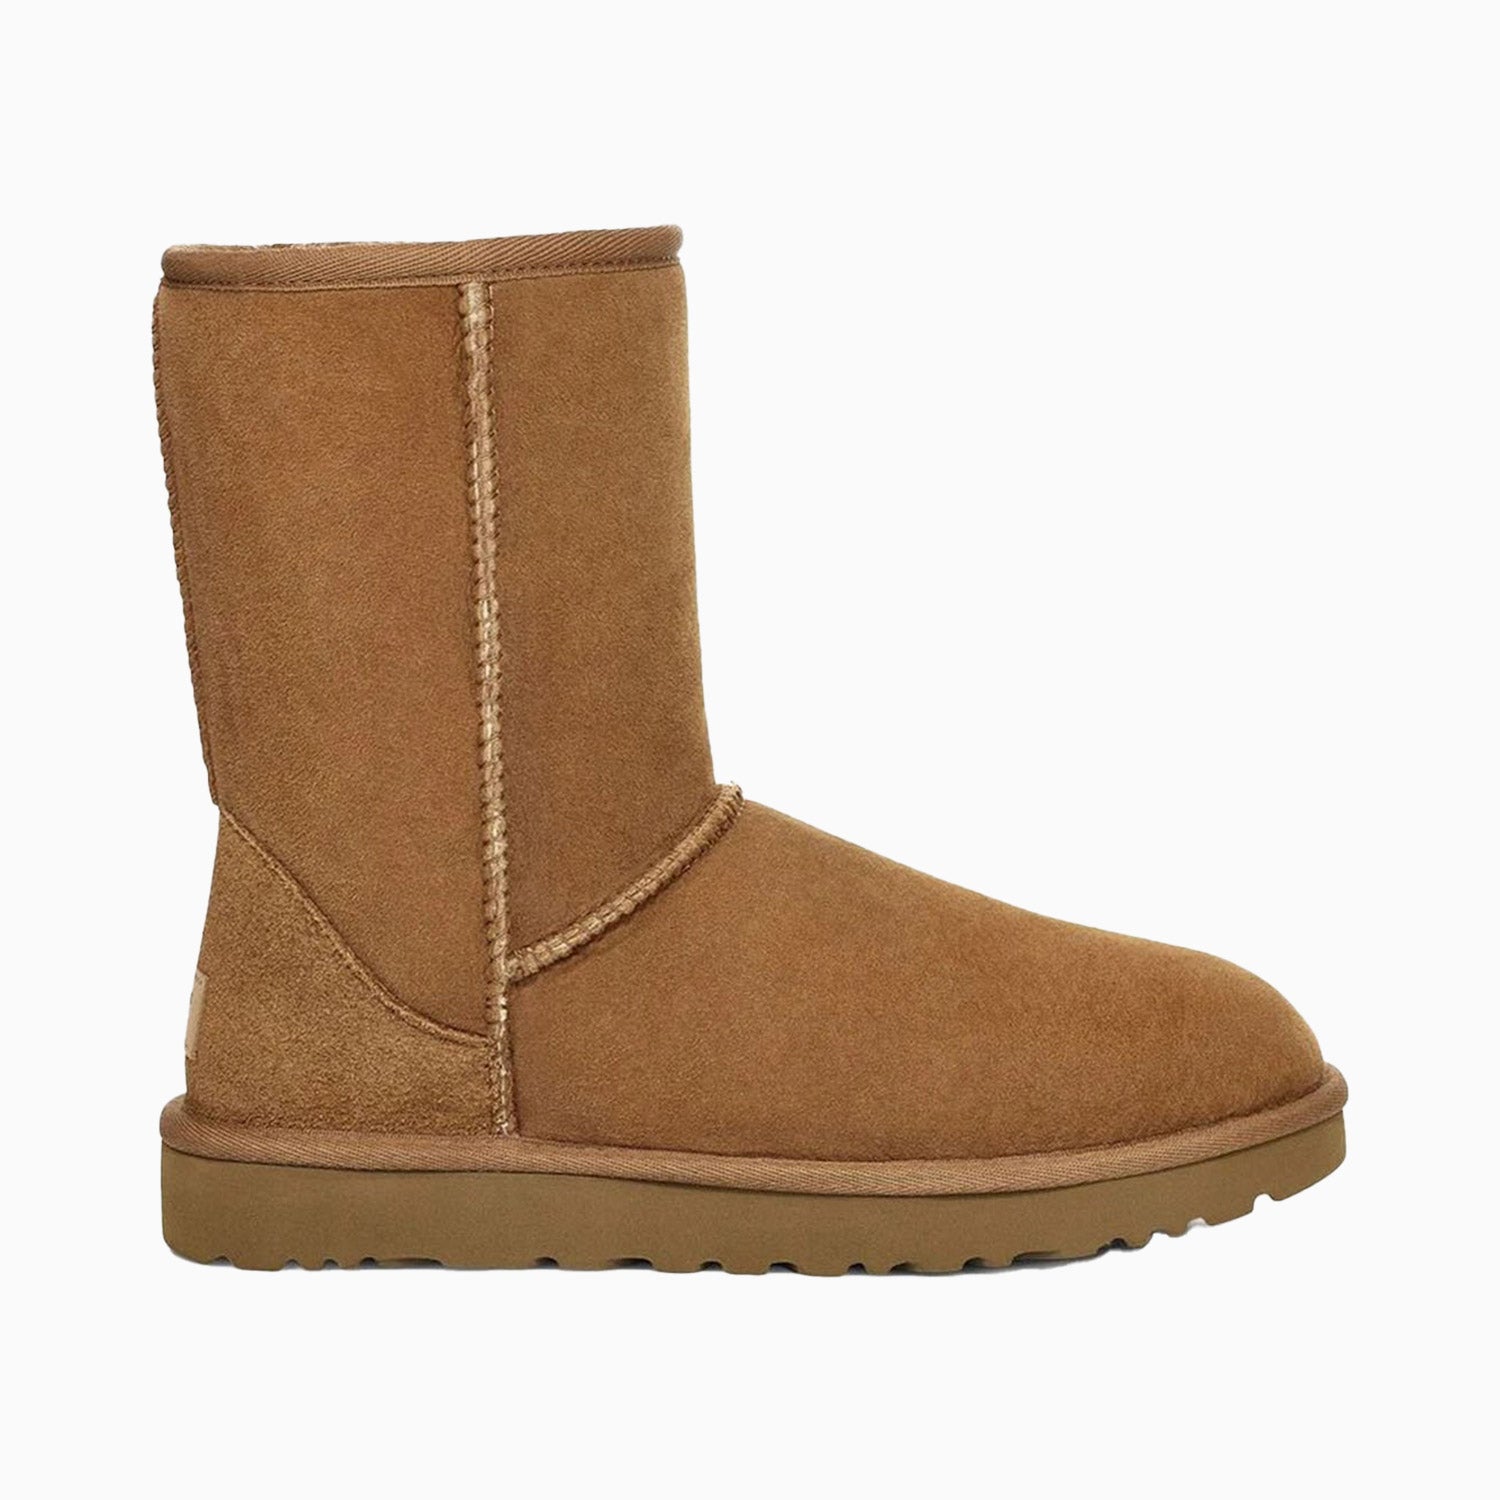 UGG Womens Classic Short II Boot - Color: CHESTNUT - Tops and Bottoms USA -